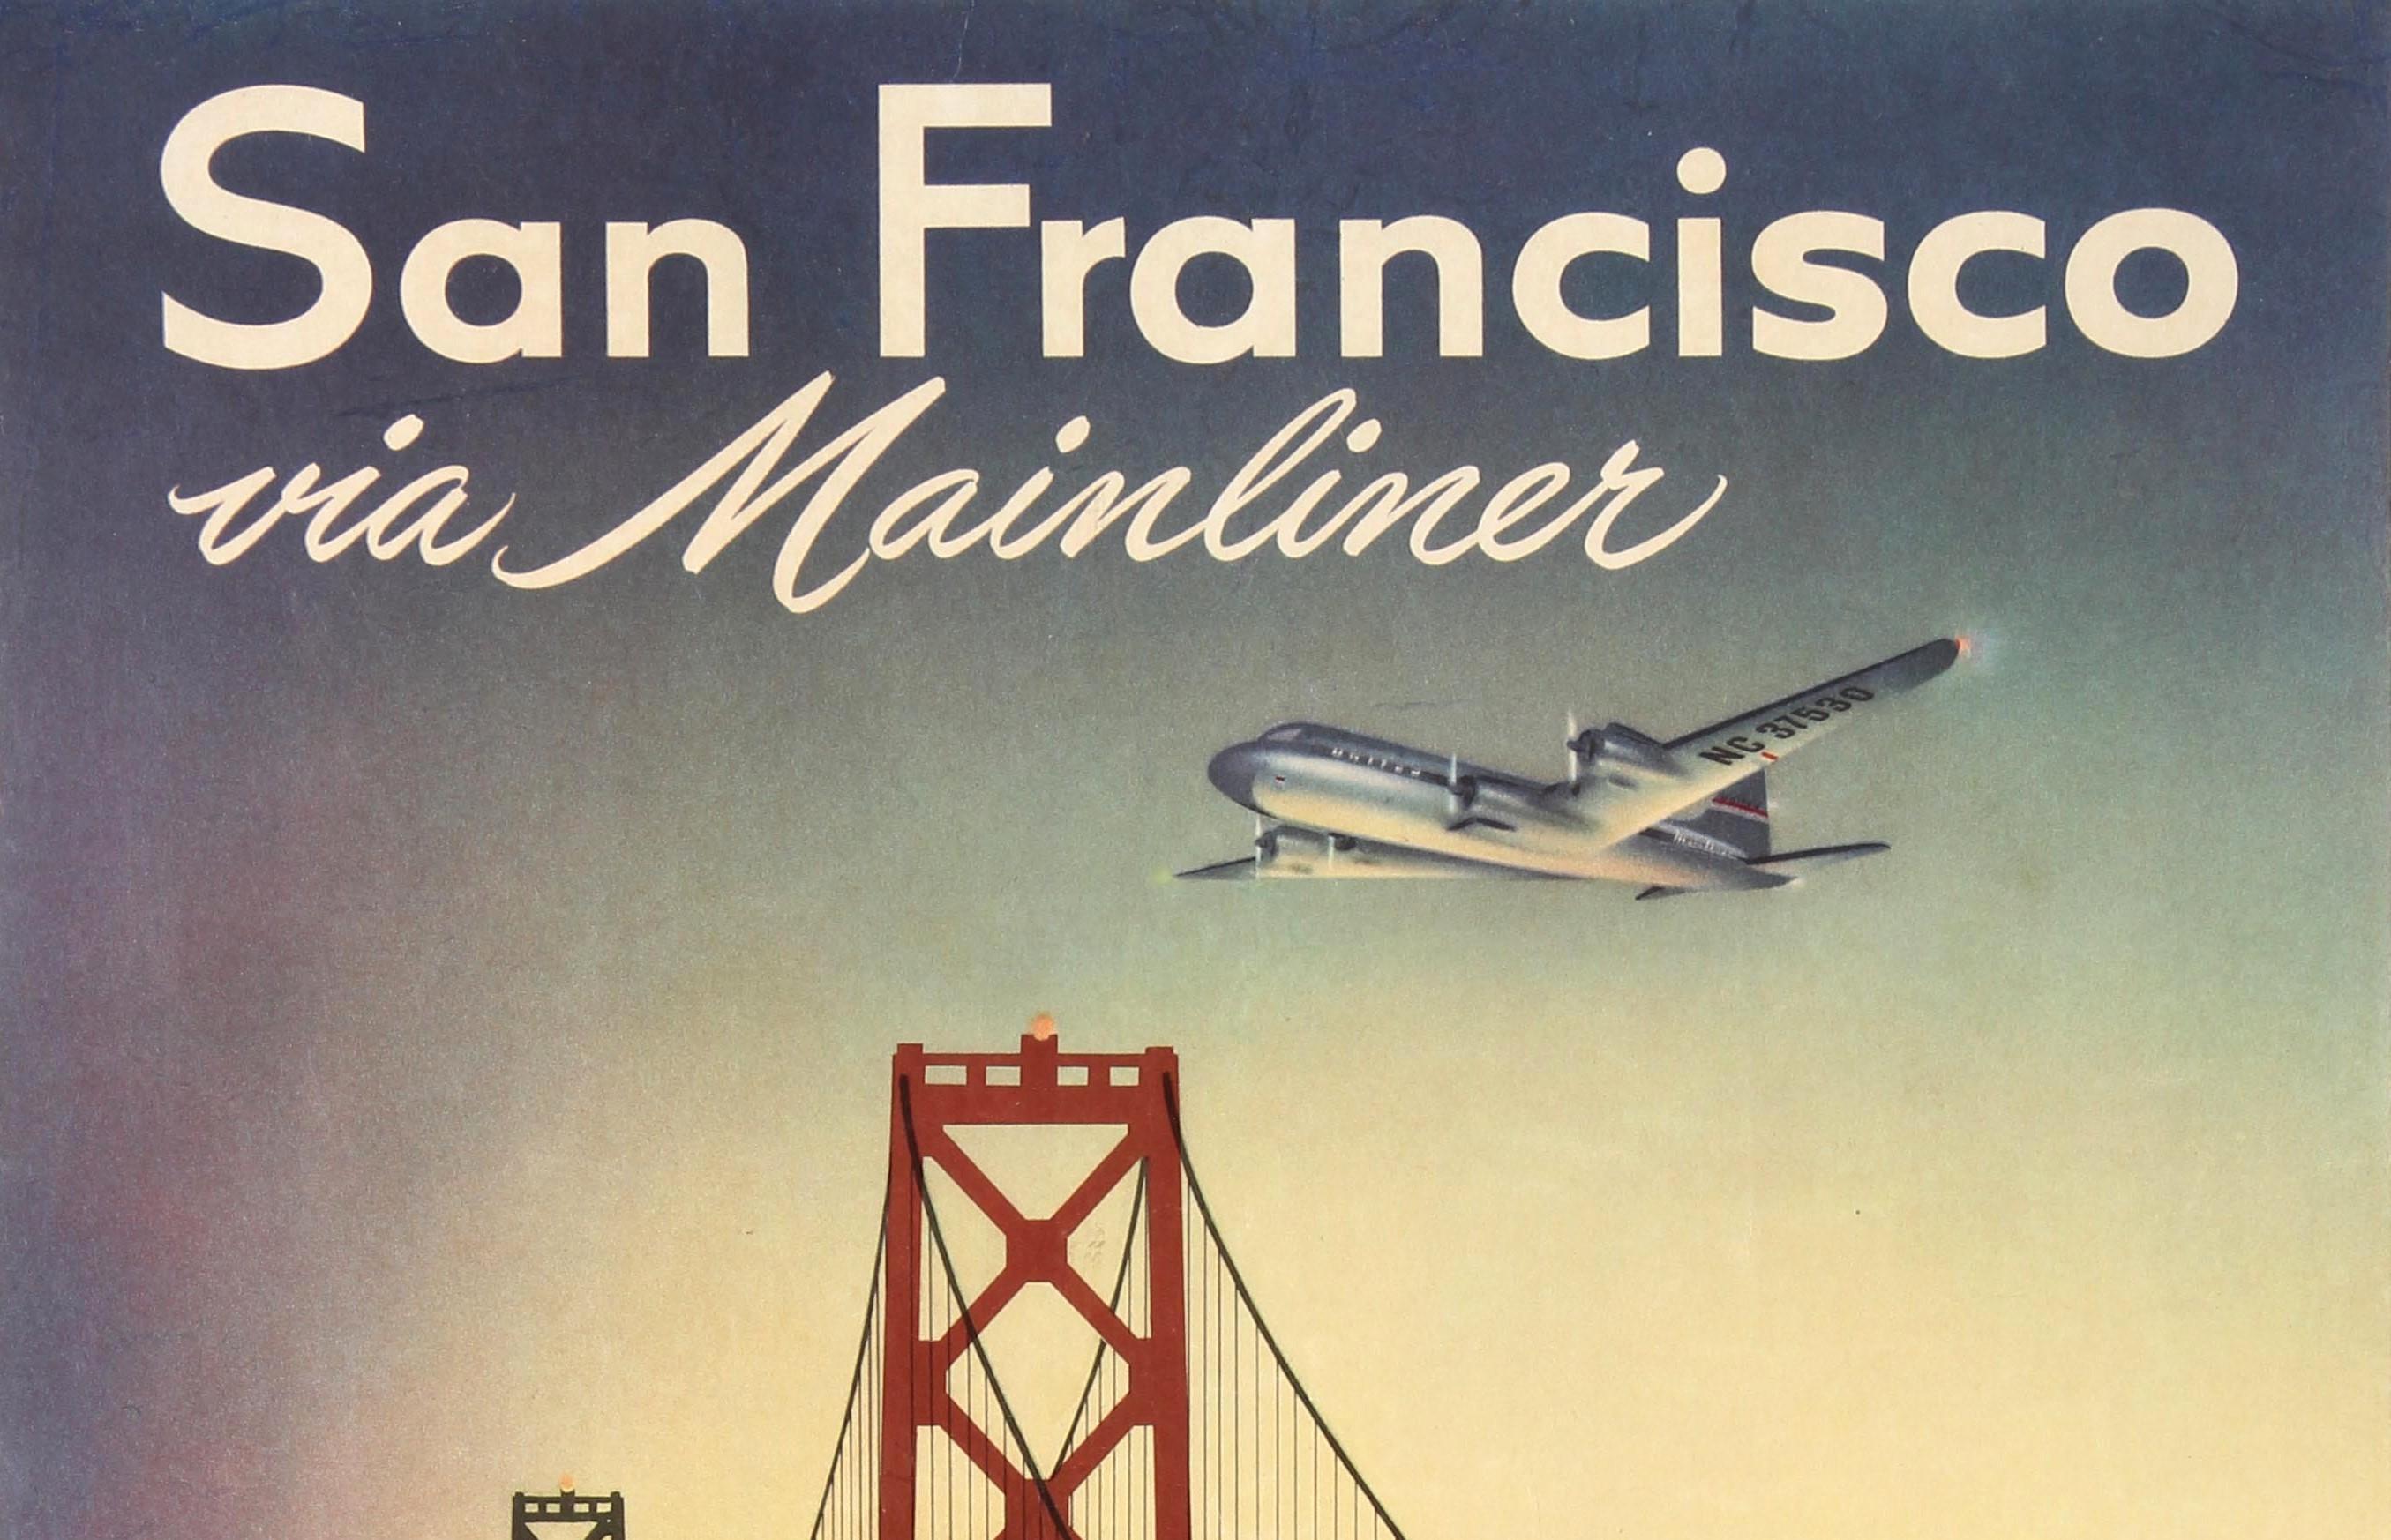 Original vintage travel poster for San Francisco via Mainliner United Air Lines featuring a stunning illustration depicting a seagull flying in front of the San Francisco–Oakland Bay Bridge in California with a United Airlines plane flying in the